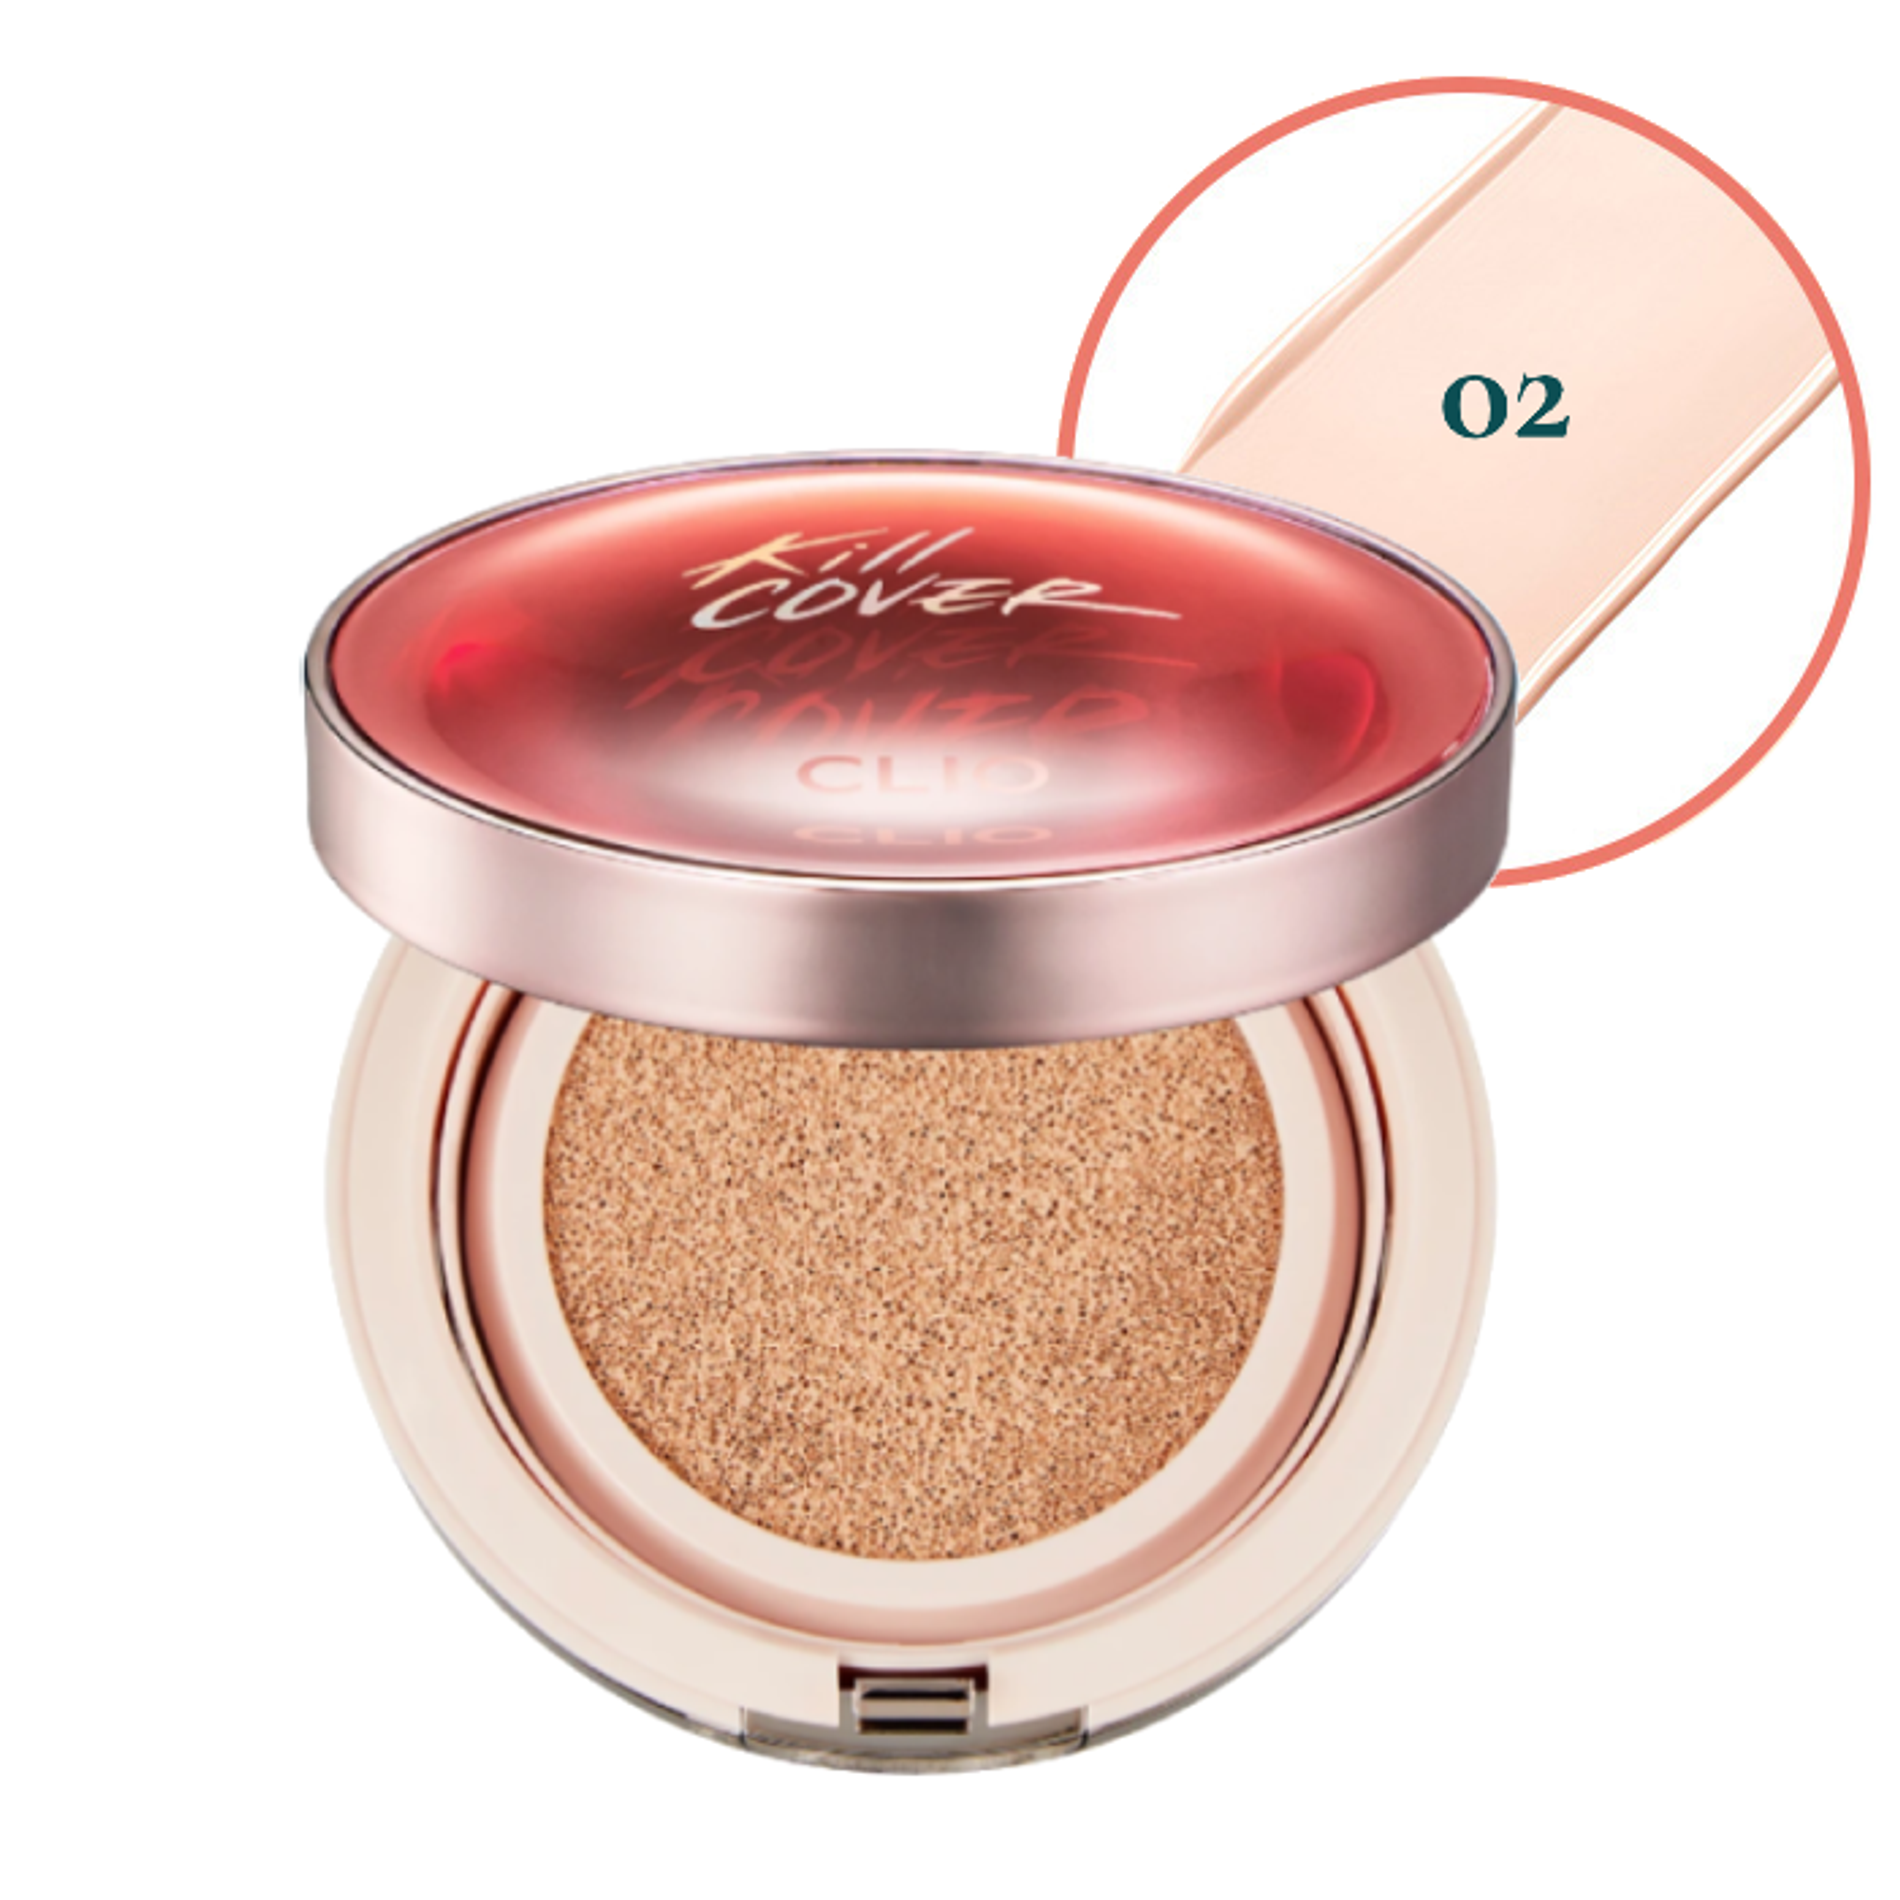 20ss-limited-phan-nuoc-hieu-ung-cang-muot-clio-kill-cover-glow-cushion-15g-2-9